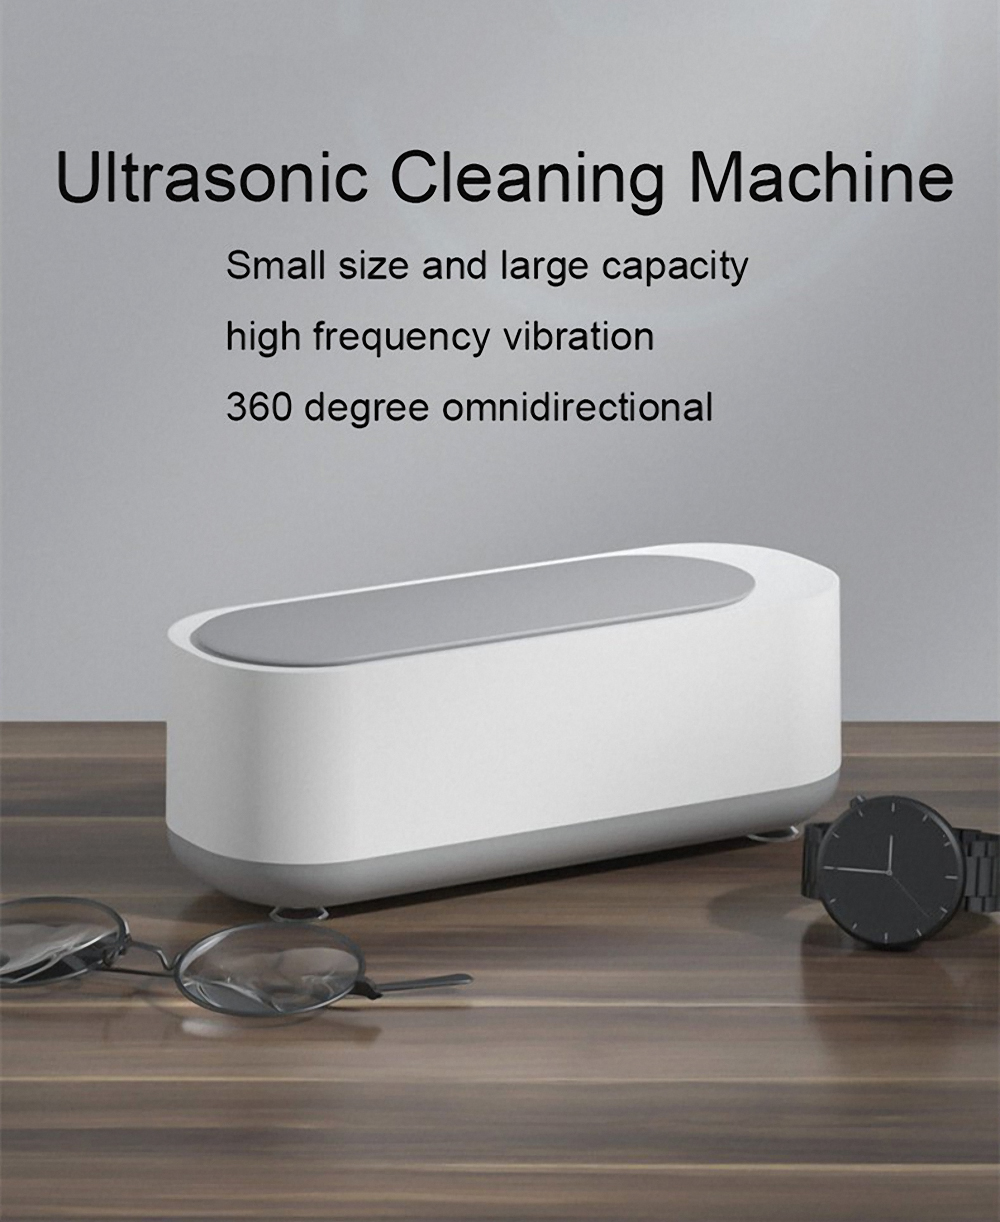 Home-Ultrasonic-Cleaner-One-Click-Cleaning-Machine-Sonic-Vibrator-Cleaning-Machine-Jewelry-Glasses-W-1915802-2